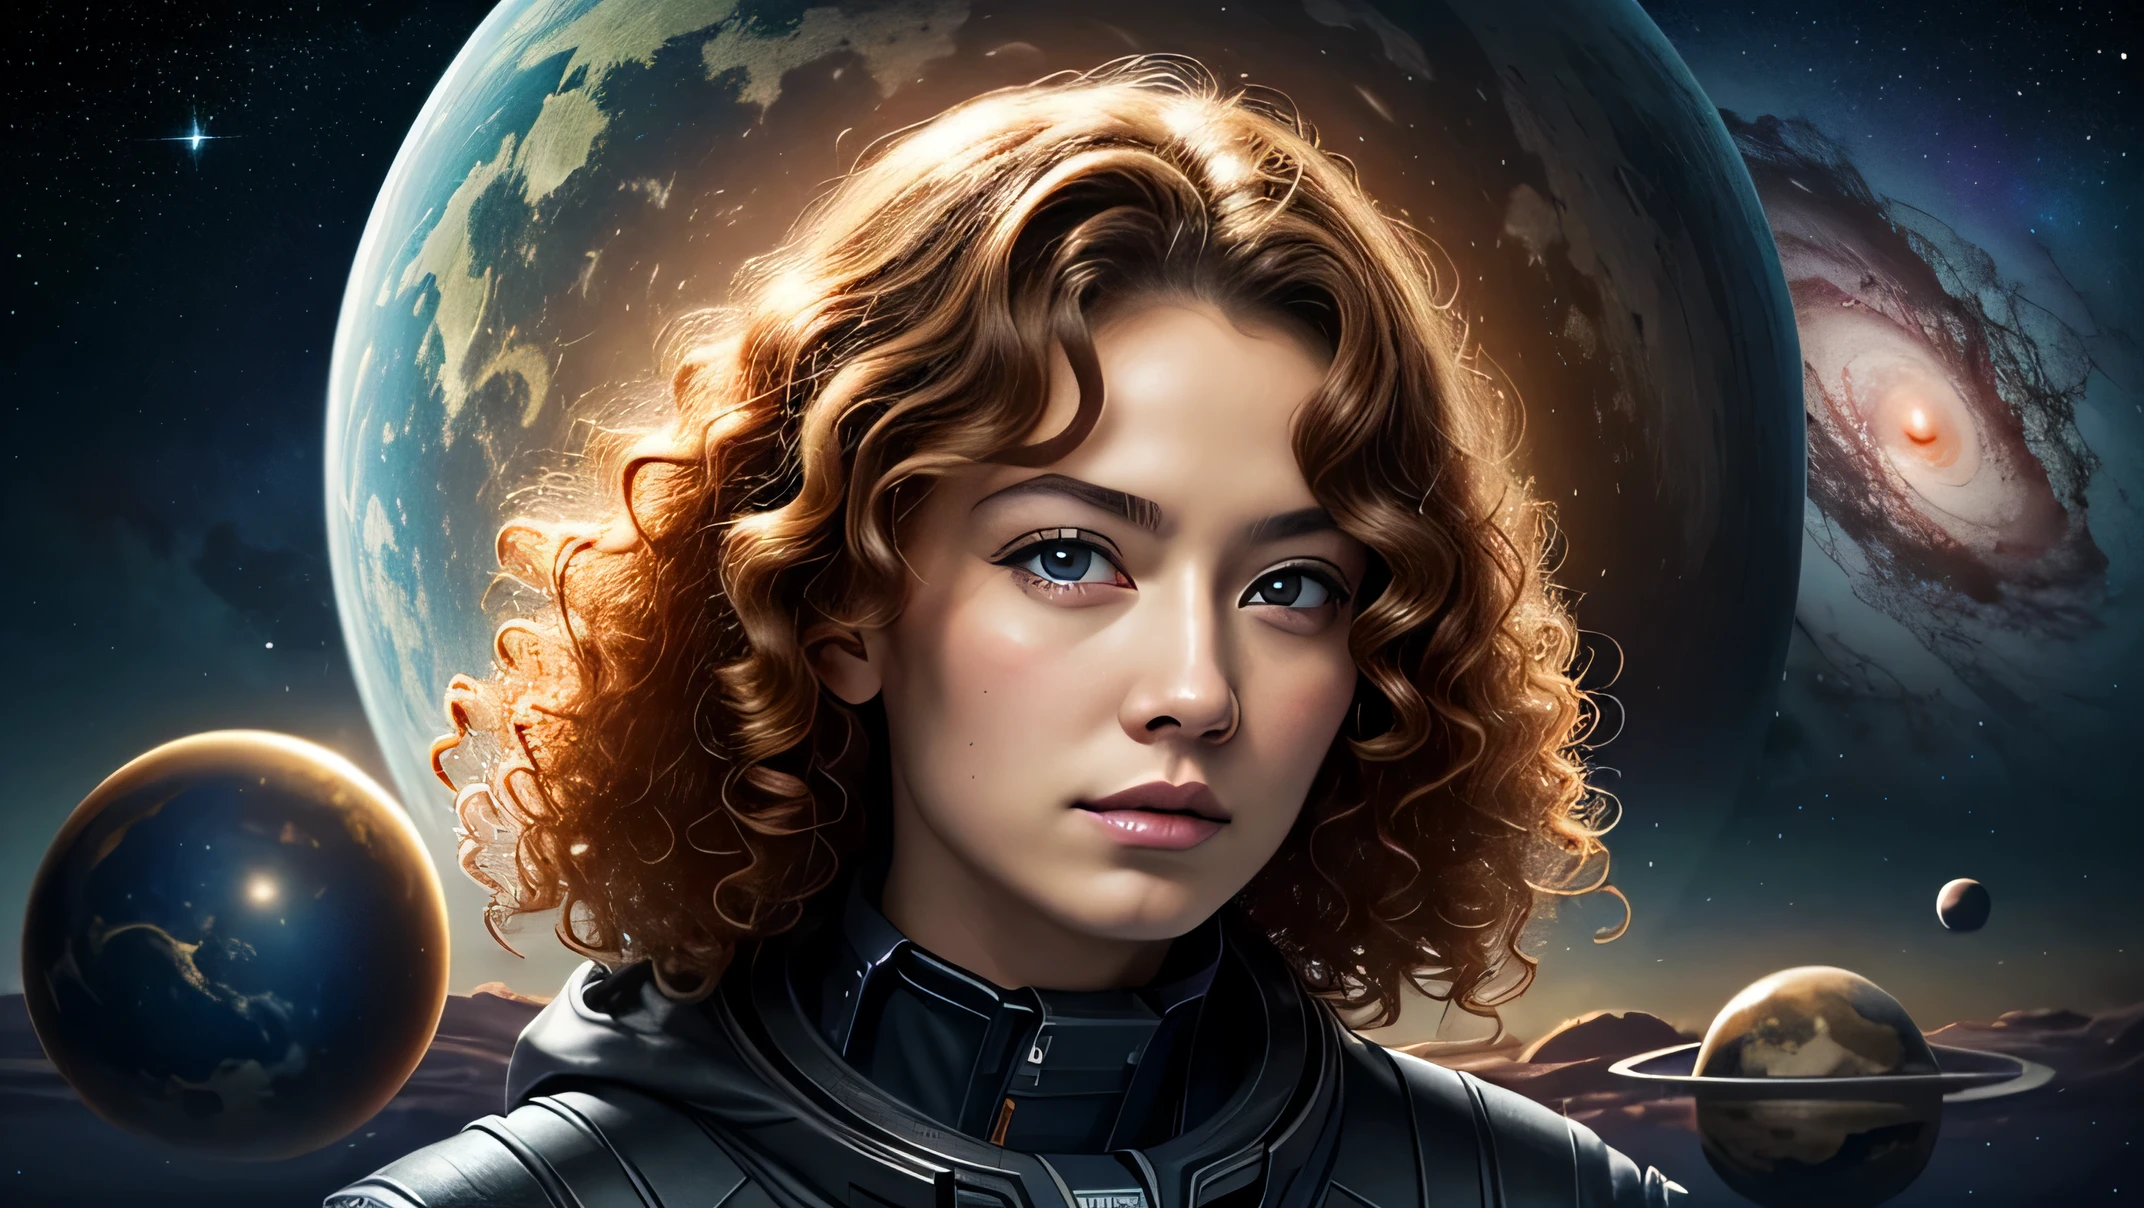 front view, nijistyle, rfktr_technotrex, woman (ginger curly hair), exploring planets, alien worlds, exotic locations, deep space, unkown terrors, galactic, nebulas, stars, fcPortrait